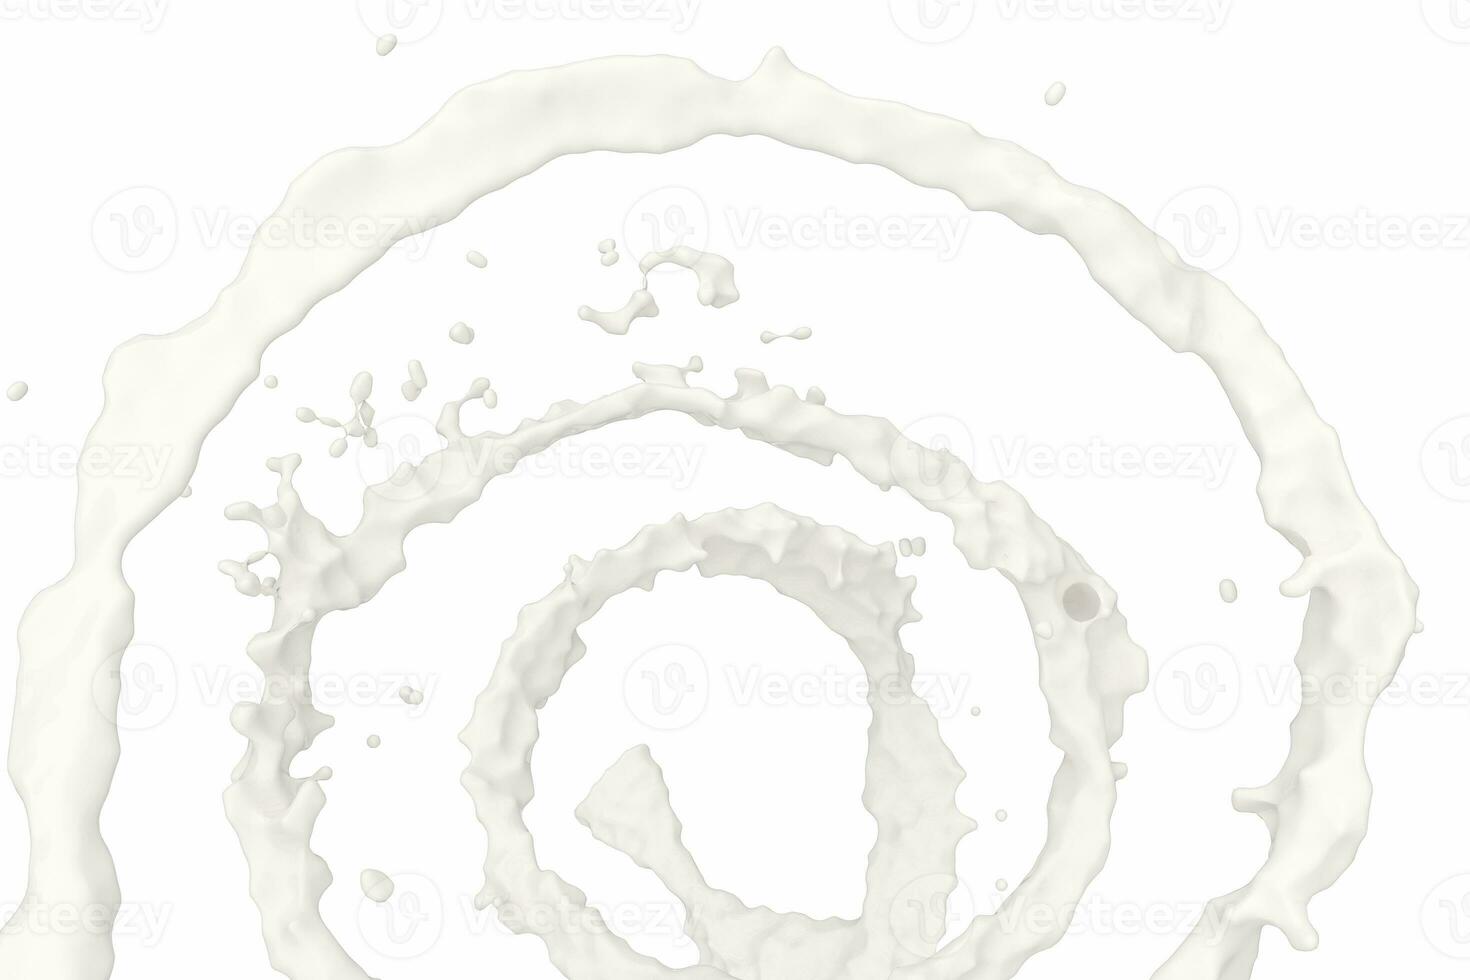 Purity splashing milk with creative shapes, 3d rendering. photo